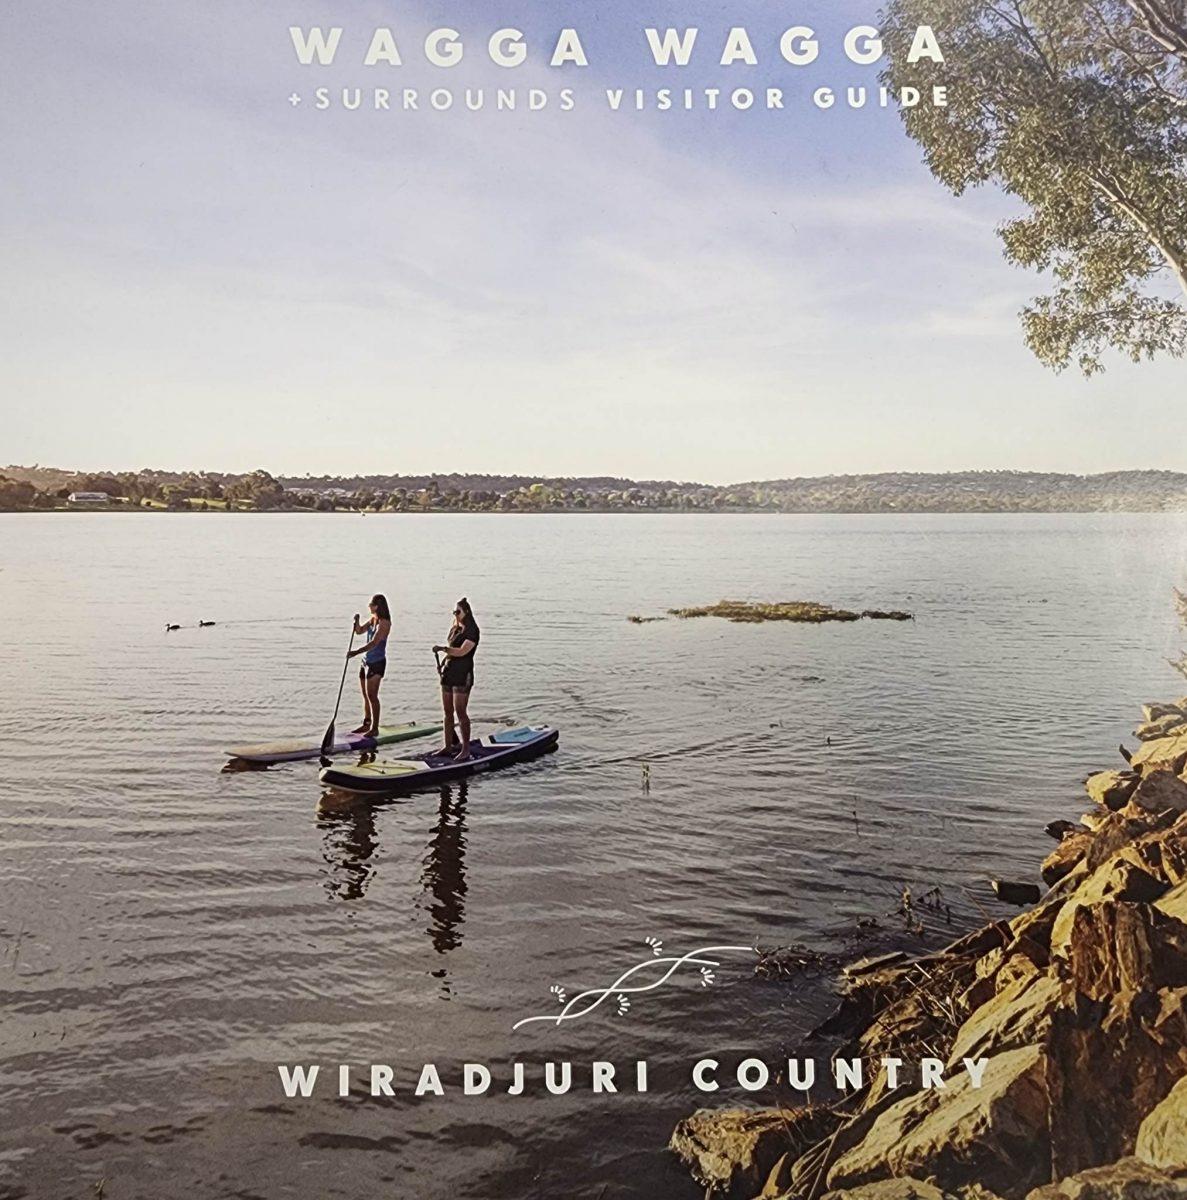 Cover of a Wagga Wagga visitor's guide